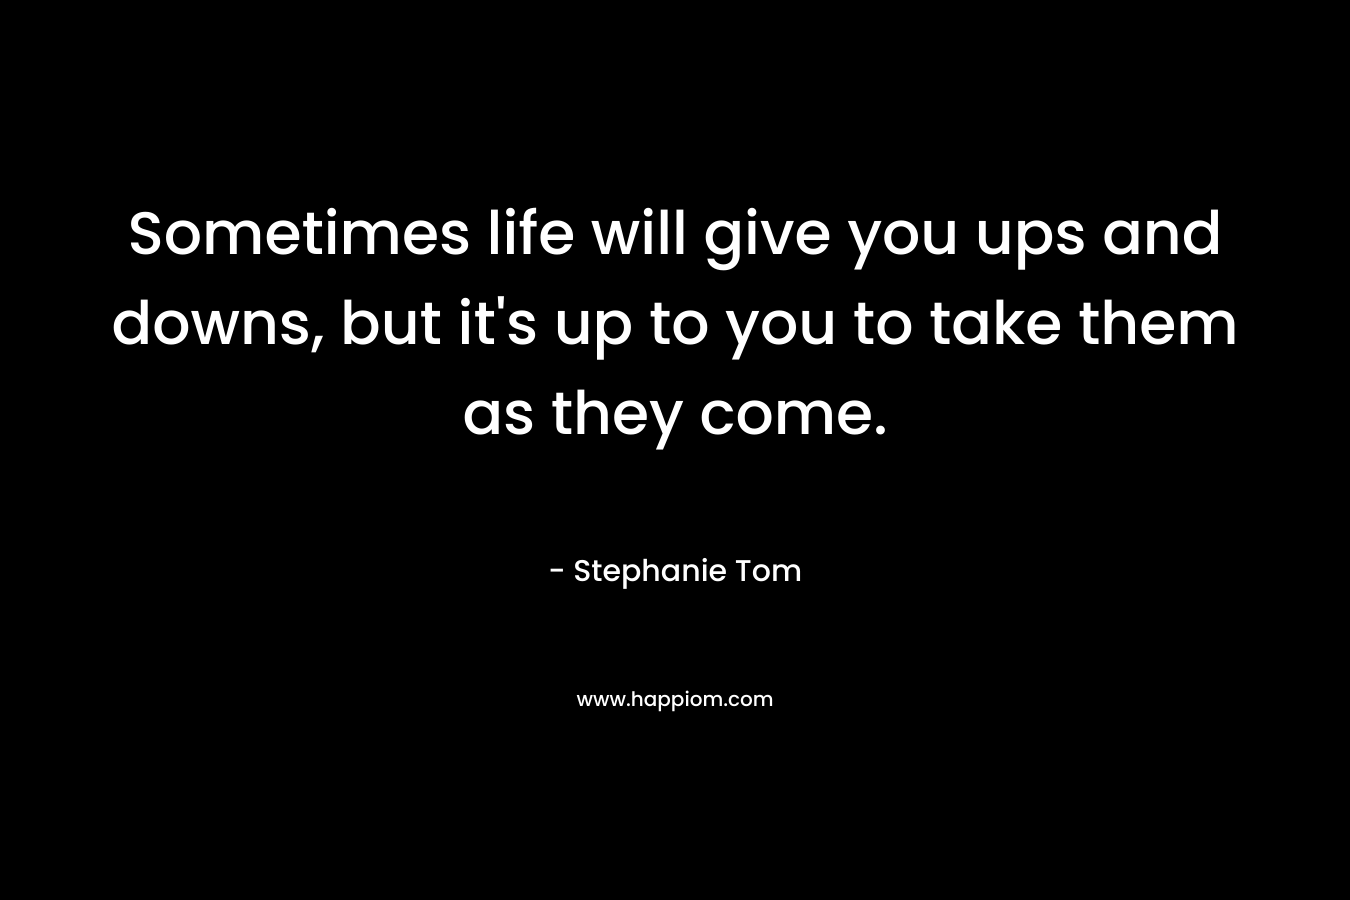 Sometimes life will give you ups and downs, but it’s up to you to take them as they come. – Stephanie Tom